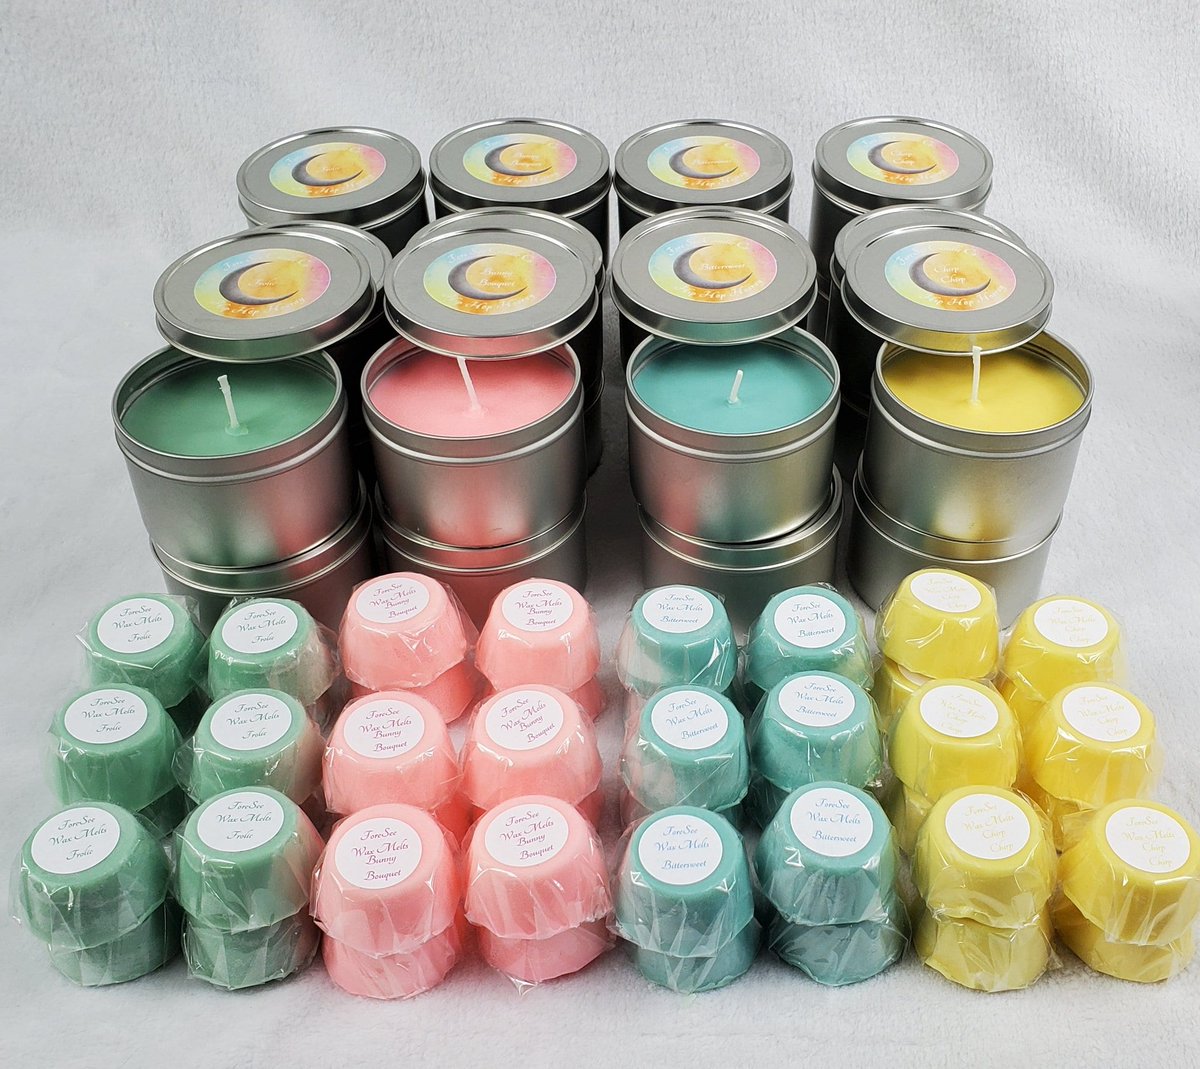 This is not a trick, we really are available! Head over to foreseecandleco.com to order our Hip Hop Hooray Collection! Candles are $15 each, or all 4 for $55, melts are $1.50 each, or $5 for the whole set! Grab more while you're there! Hoppy hunting! #candles #hiphophooray